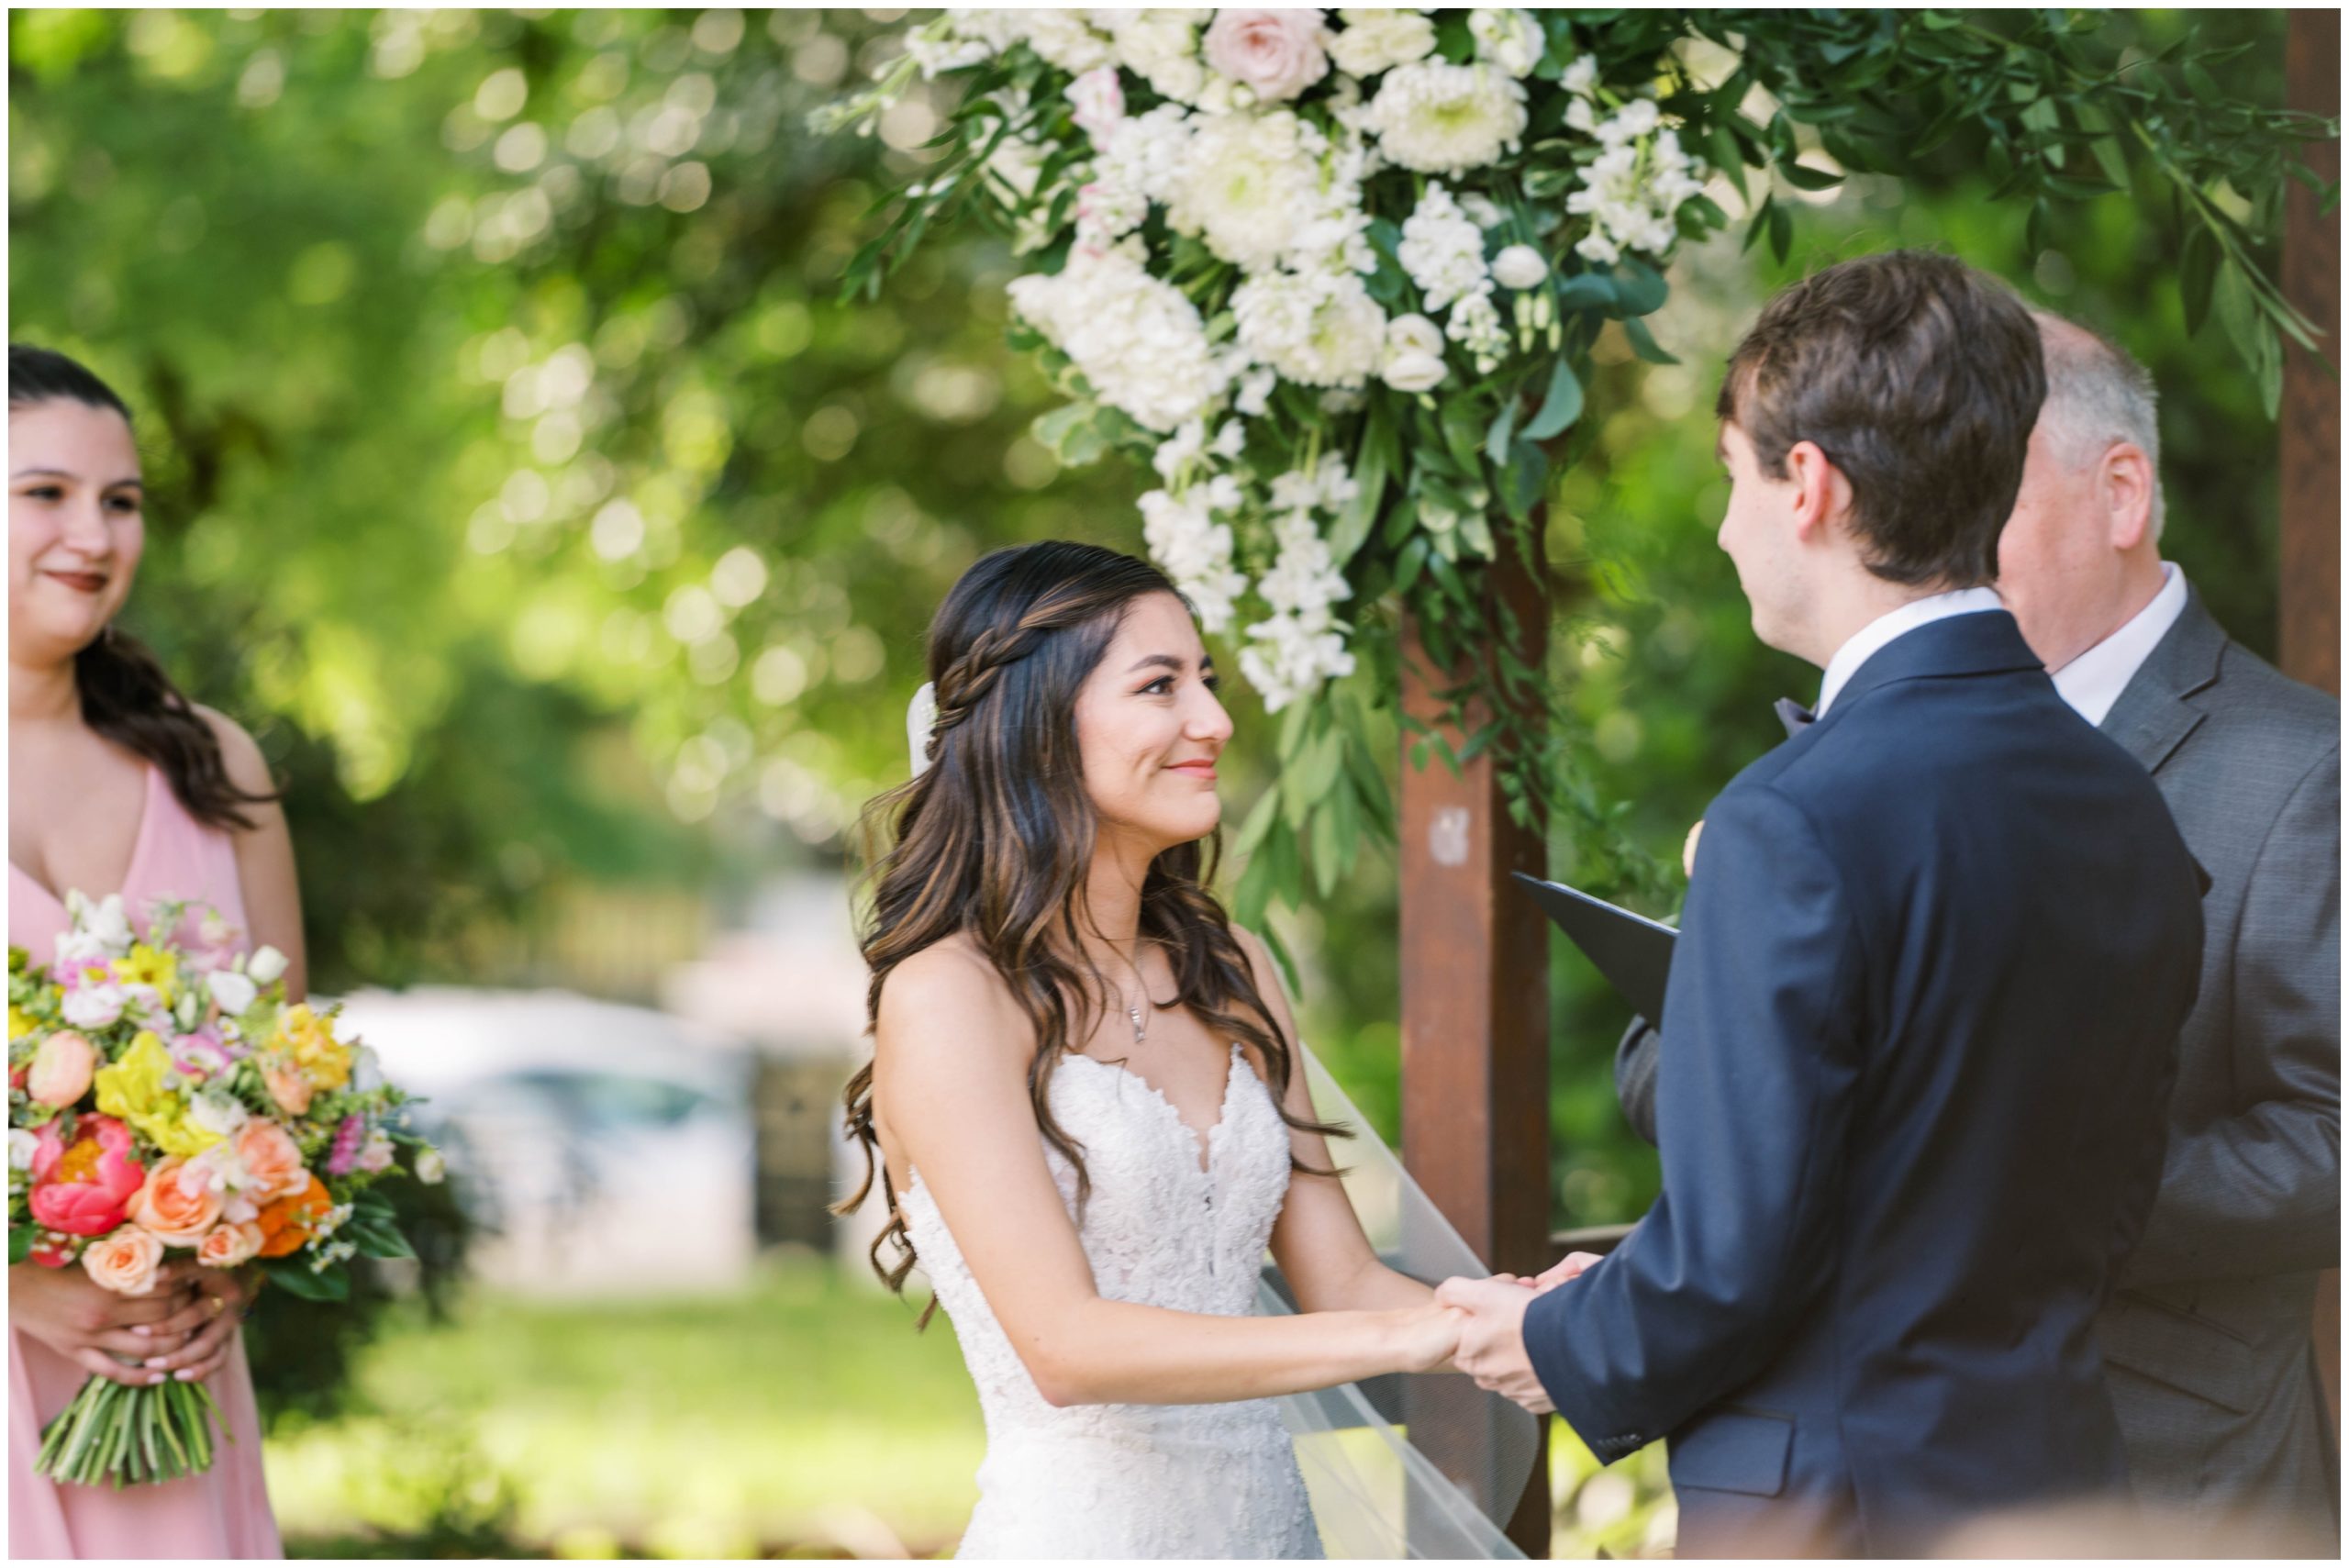 Outdoor wedding ceremony on The Lawn at The Merrimon-Wynne House